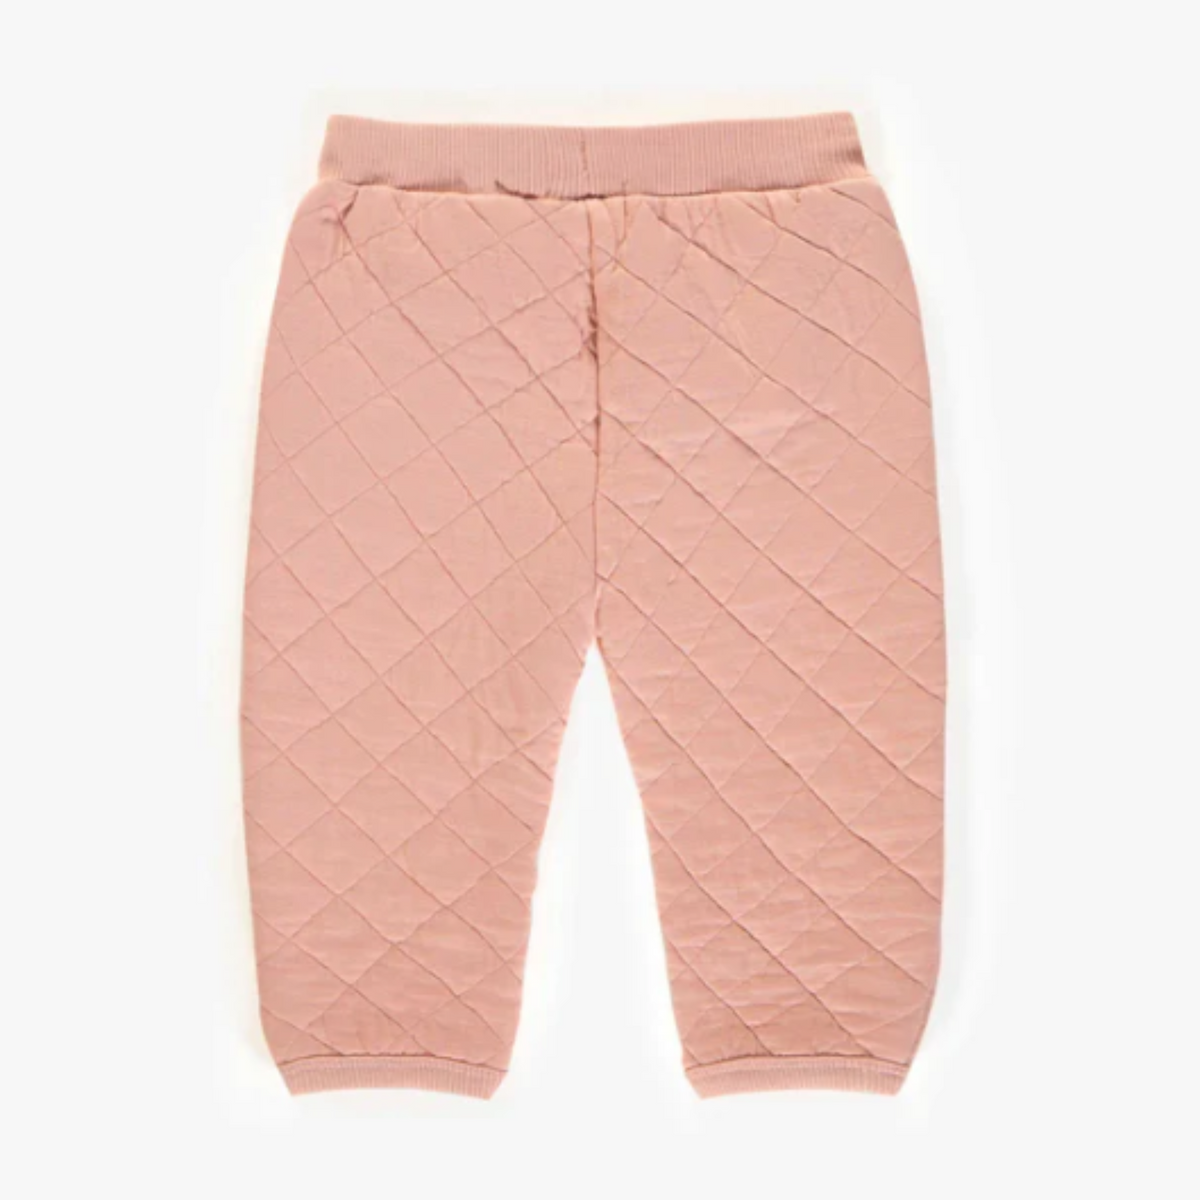 Pink quilted jersey pants